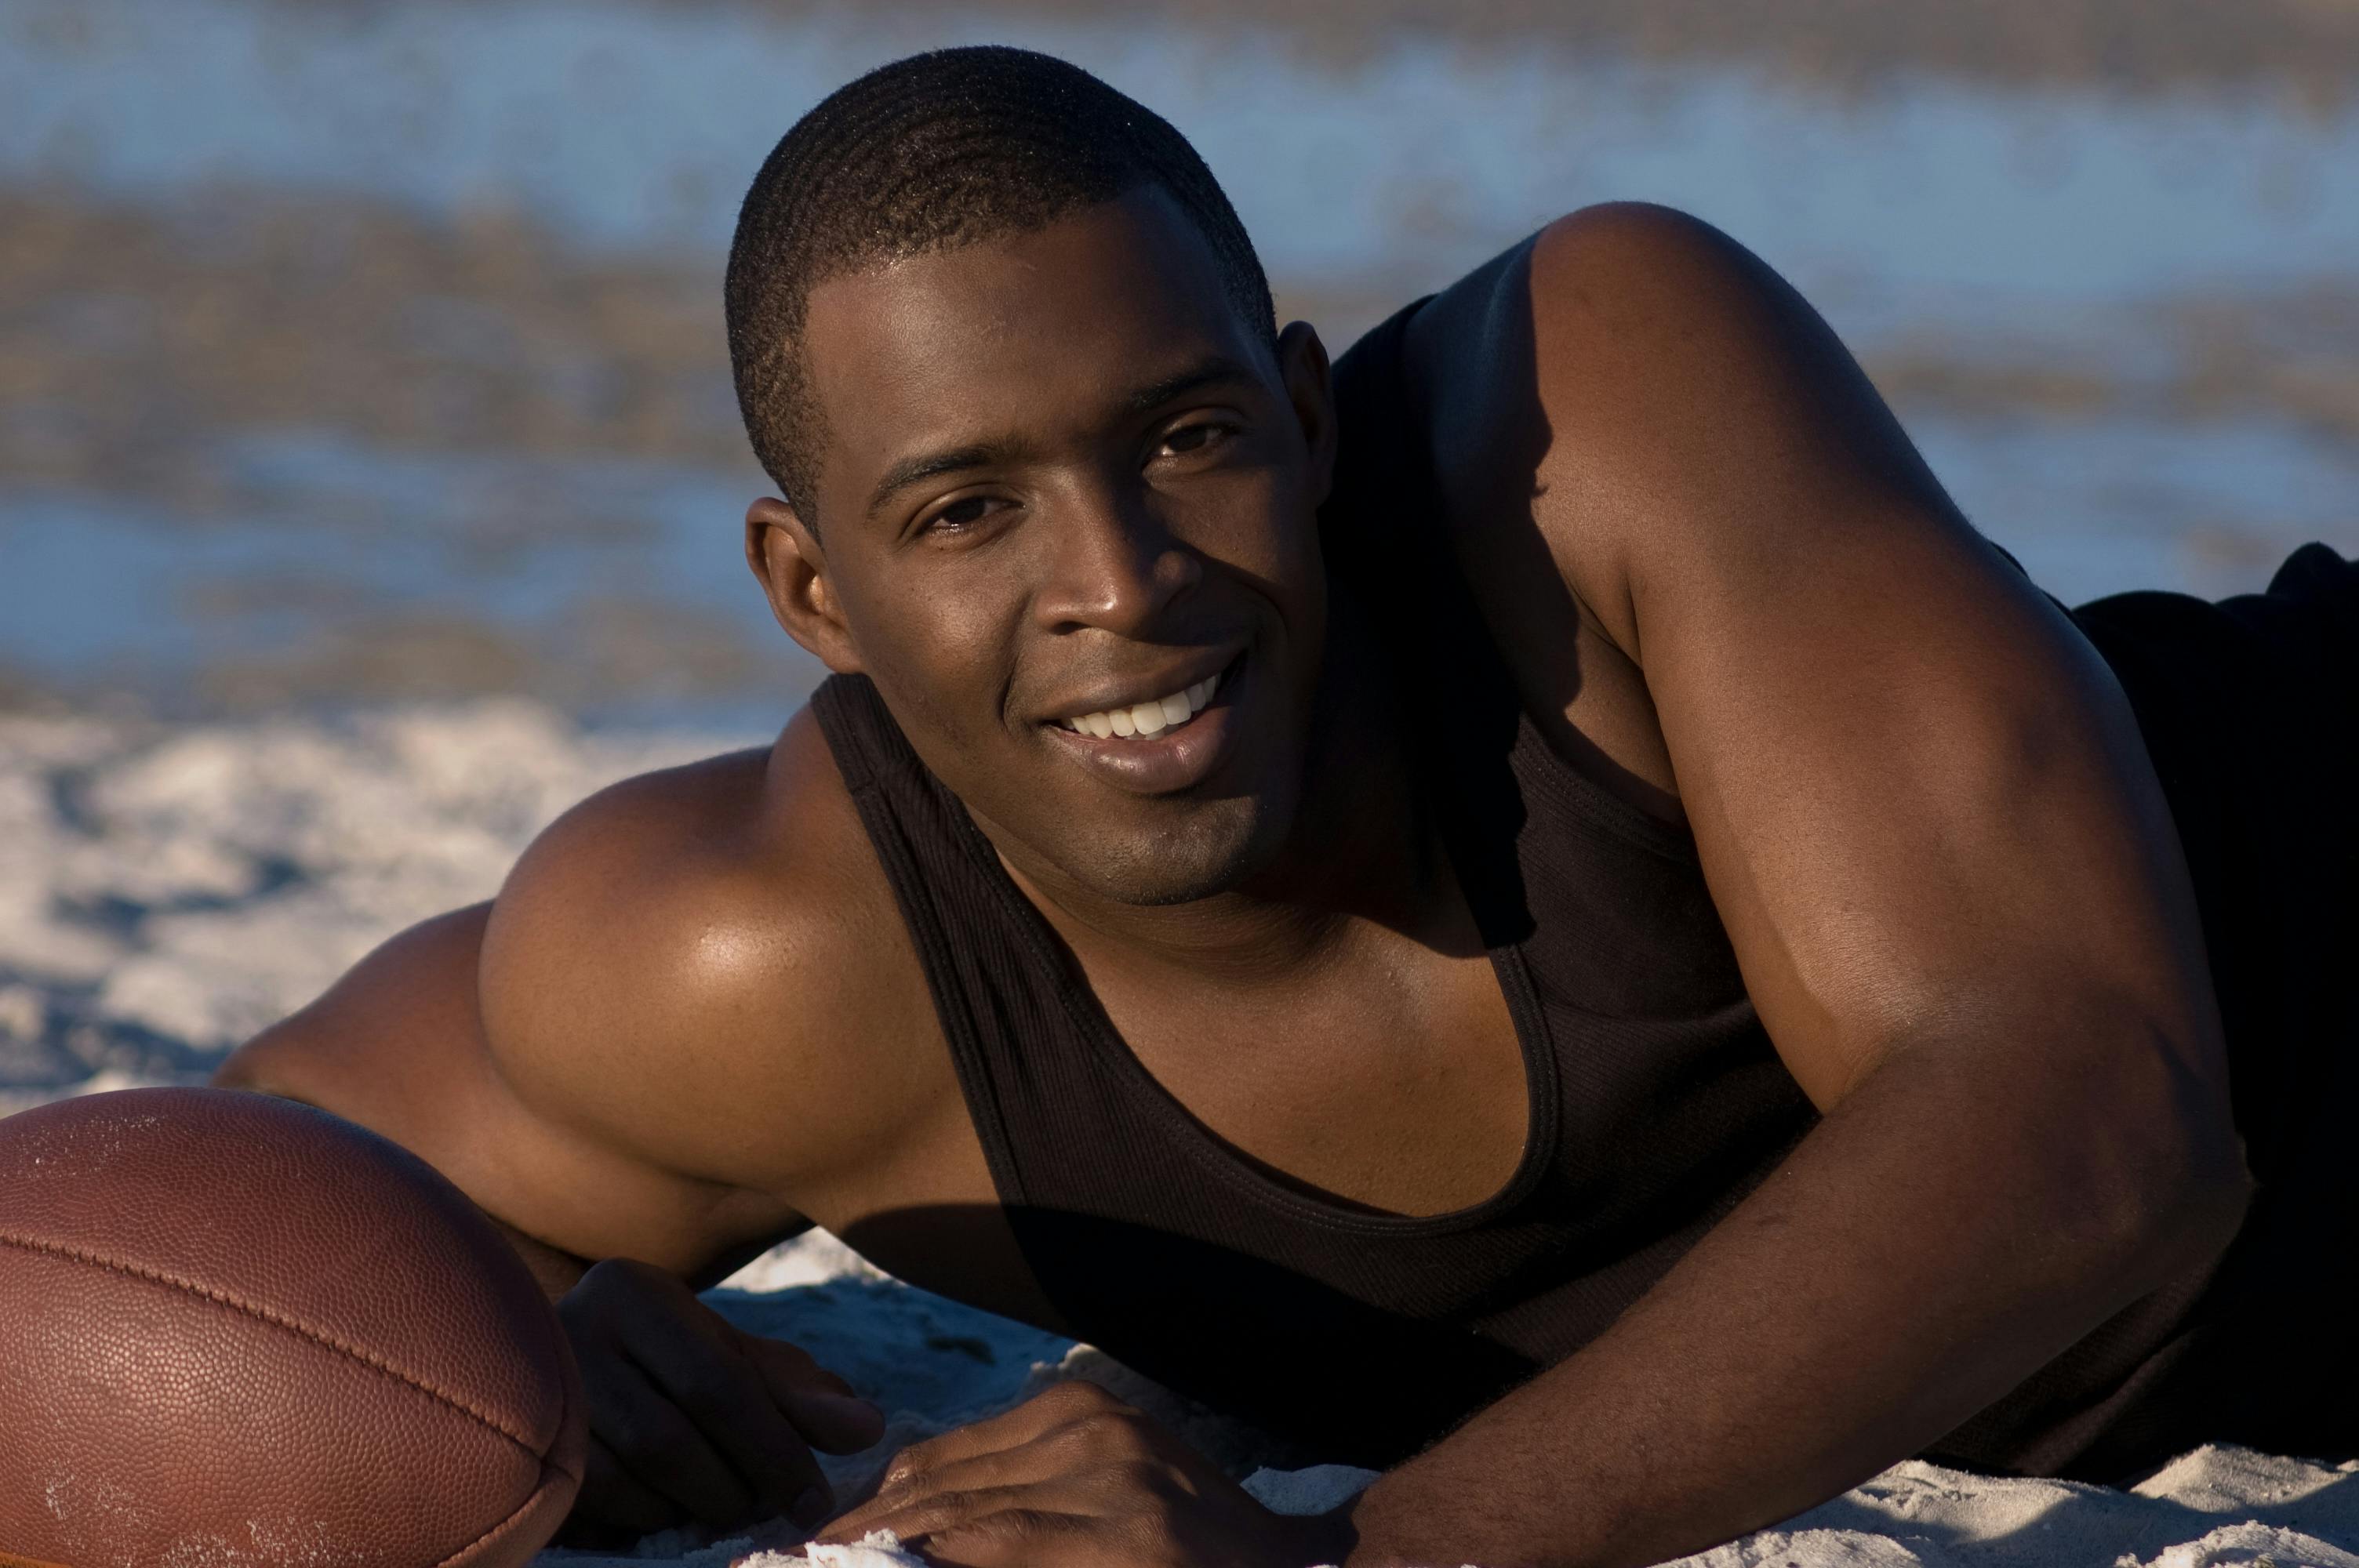 photo of a man in a black tank top smiling near a football